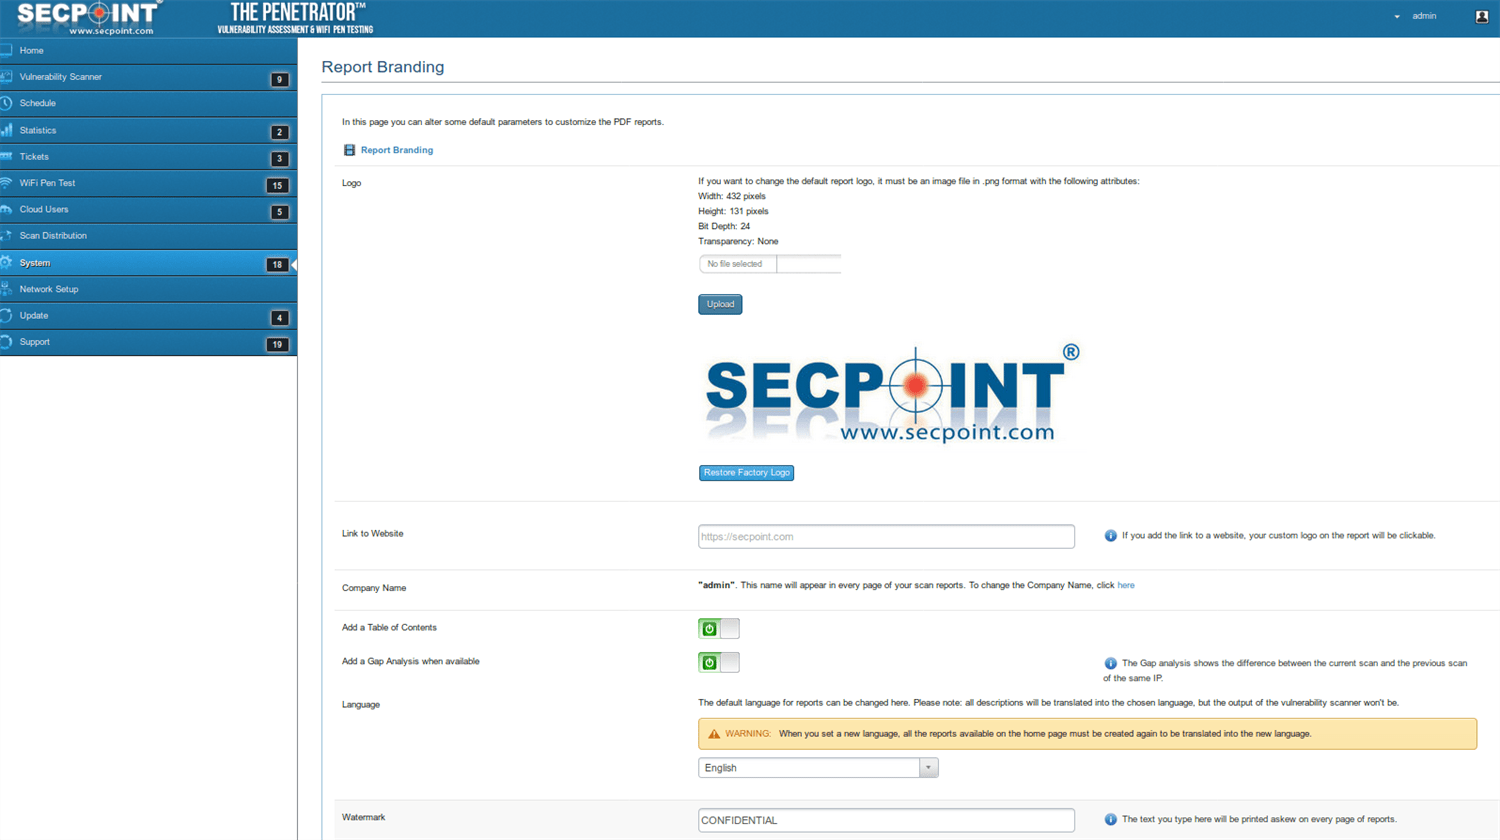 SecPoint Penetrator S9 - 1 IP Concurrent Scan License 1 Year Renewal - SecPoint